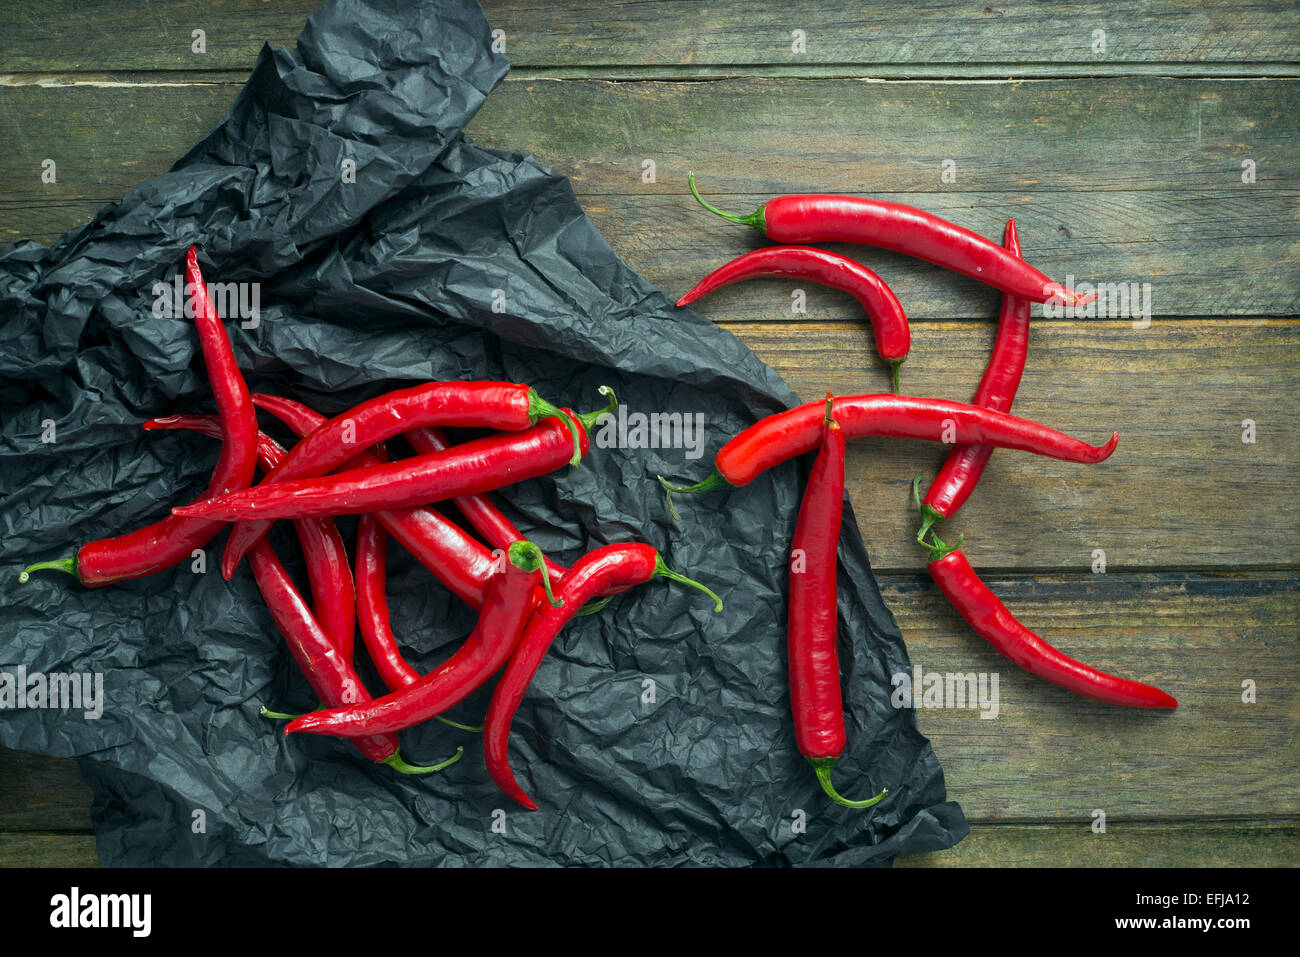 Chilli peppers on a black paper on an old wooden table Stock Photo